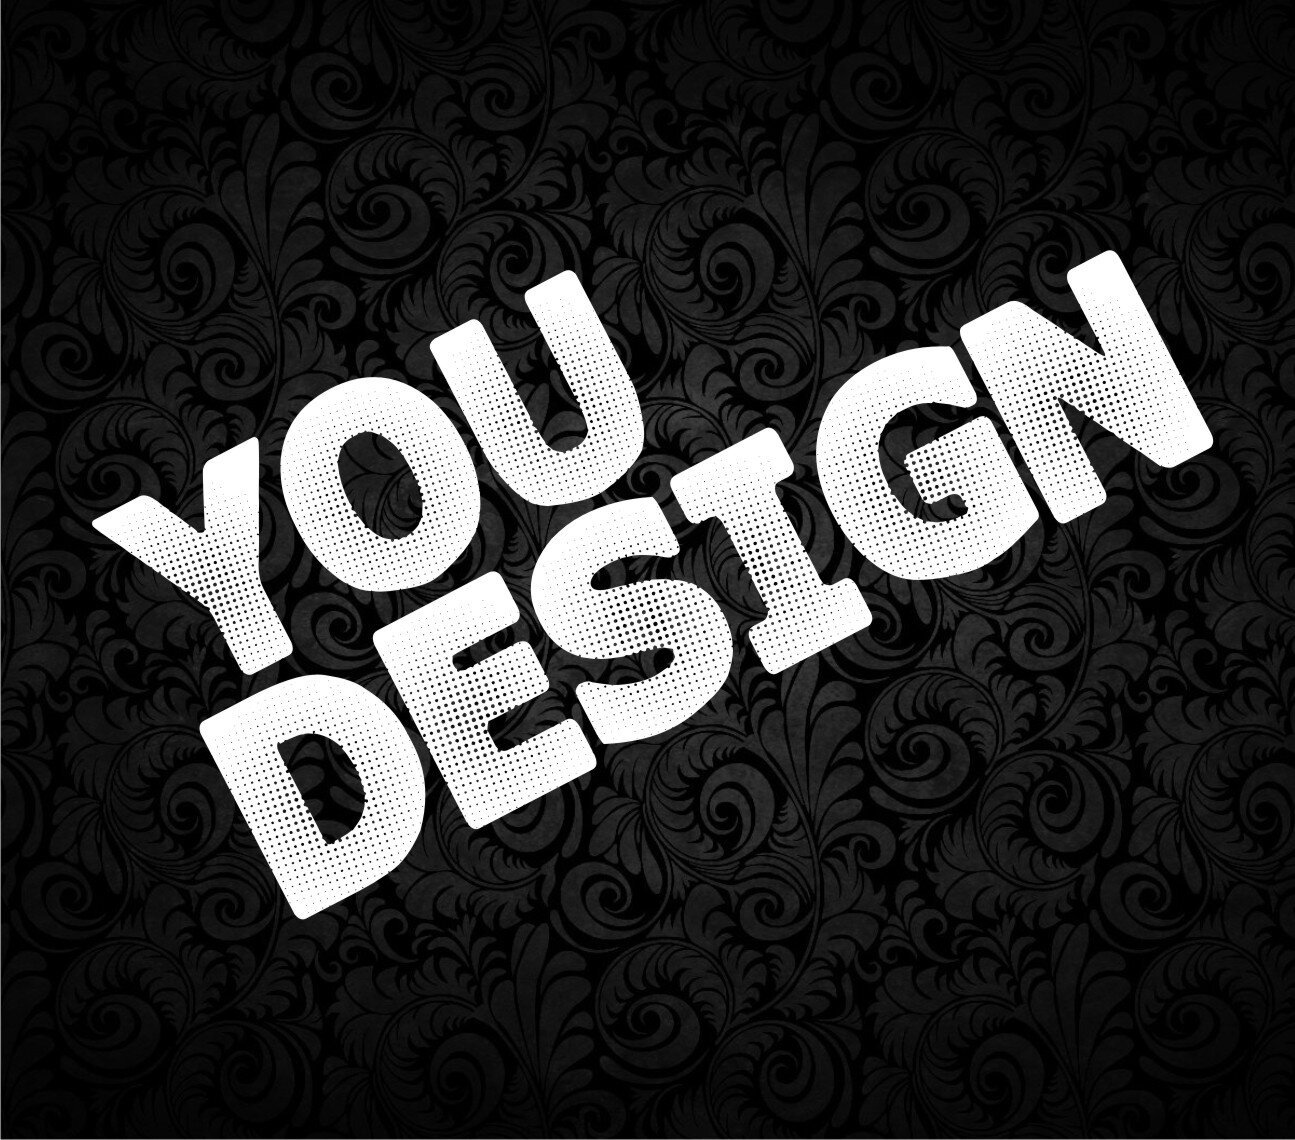 U Design, is our new printing concept to give you the chance to design your own T-shirts, Mugs, Mobile covers, glass frames, rock frames, Puzzles and Pillows...